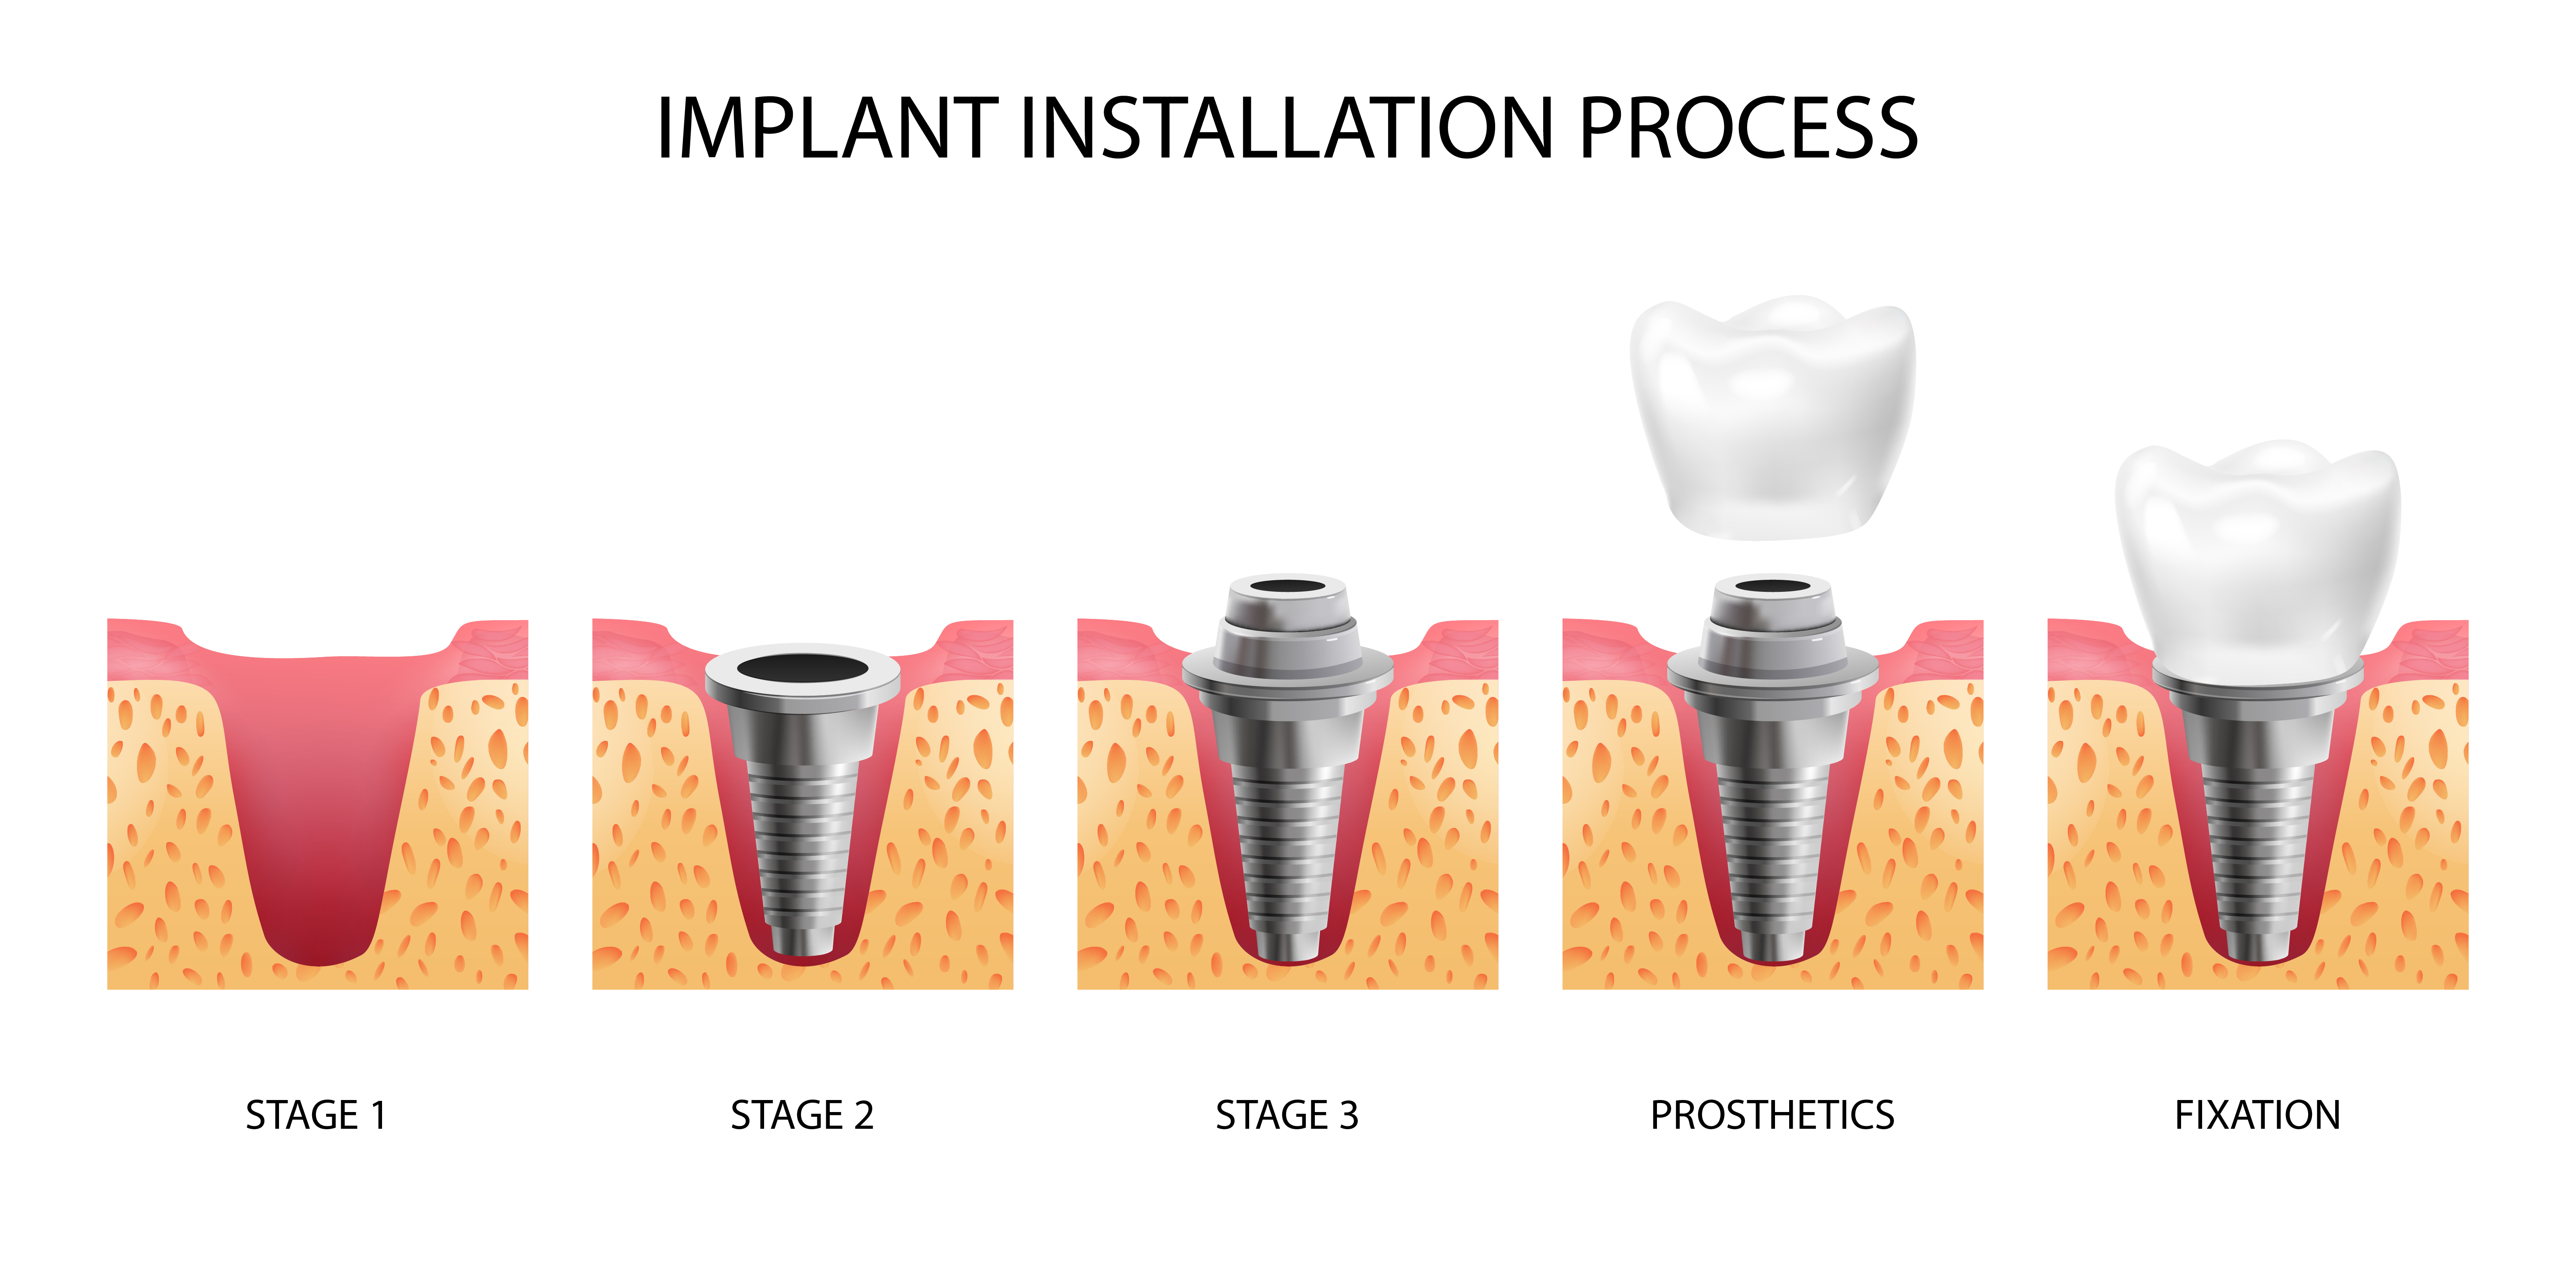 LATEST AND ADVANCED TREND OF DENTAL IMPLANTOLOGY